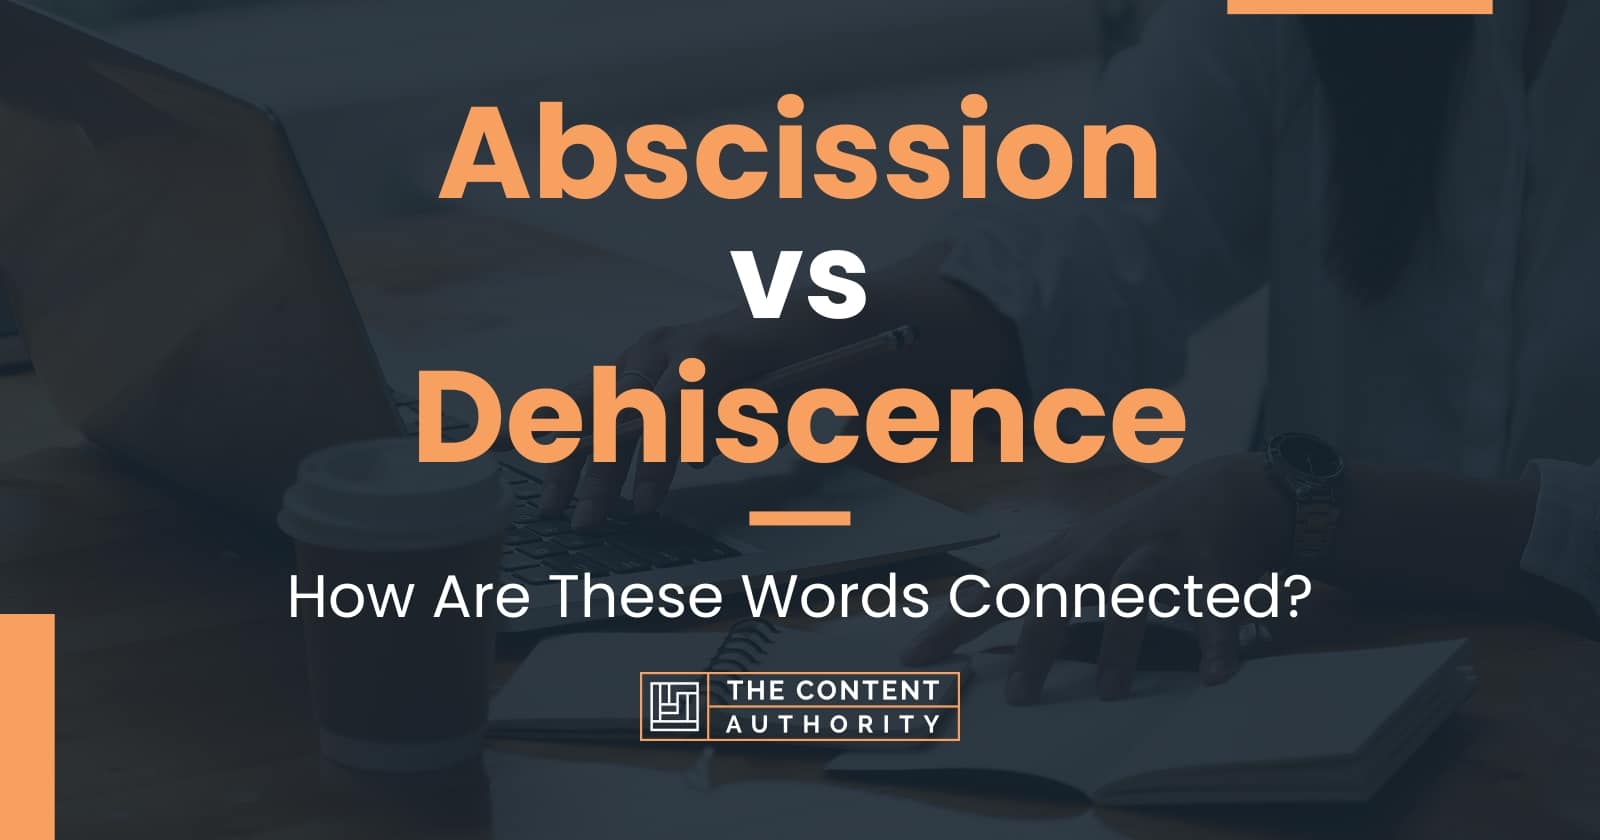 Abscission vs Dehiscence: How Are These Words Connected?